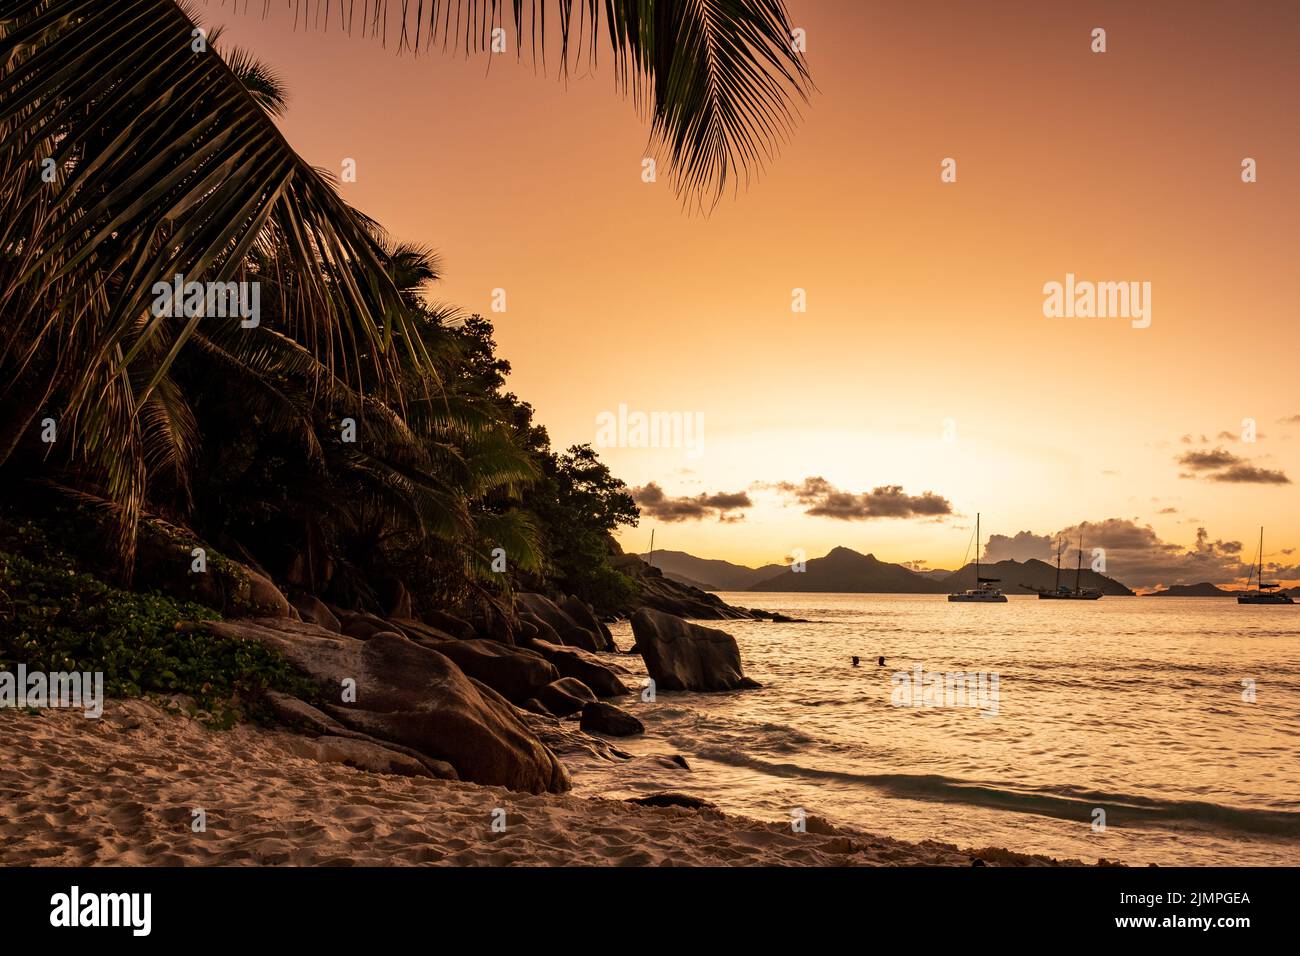 Anse Patates beach, La Digue Island, Seyshelles, white beach with blue ocean and palm trees, sunset on the beach Stock Photo